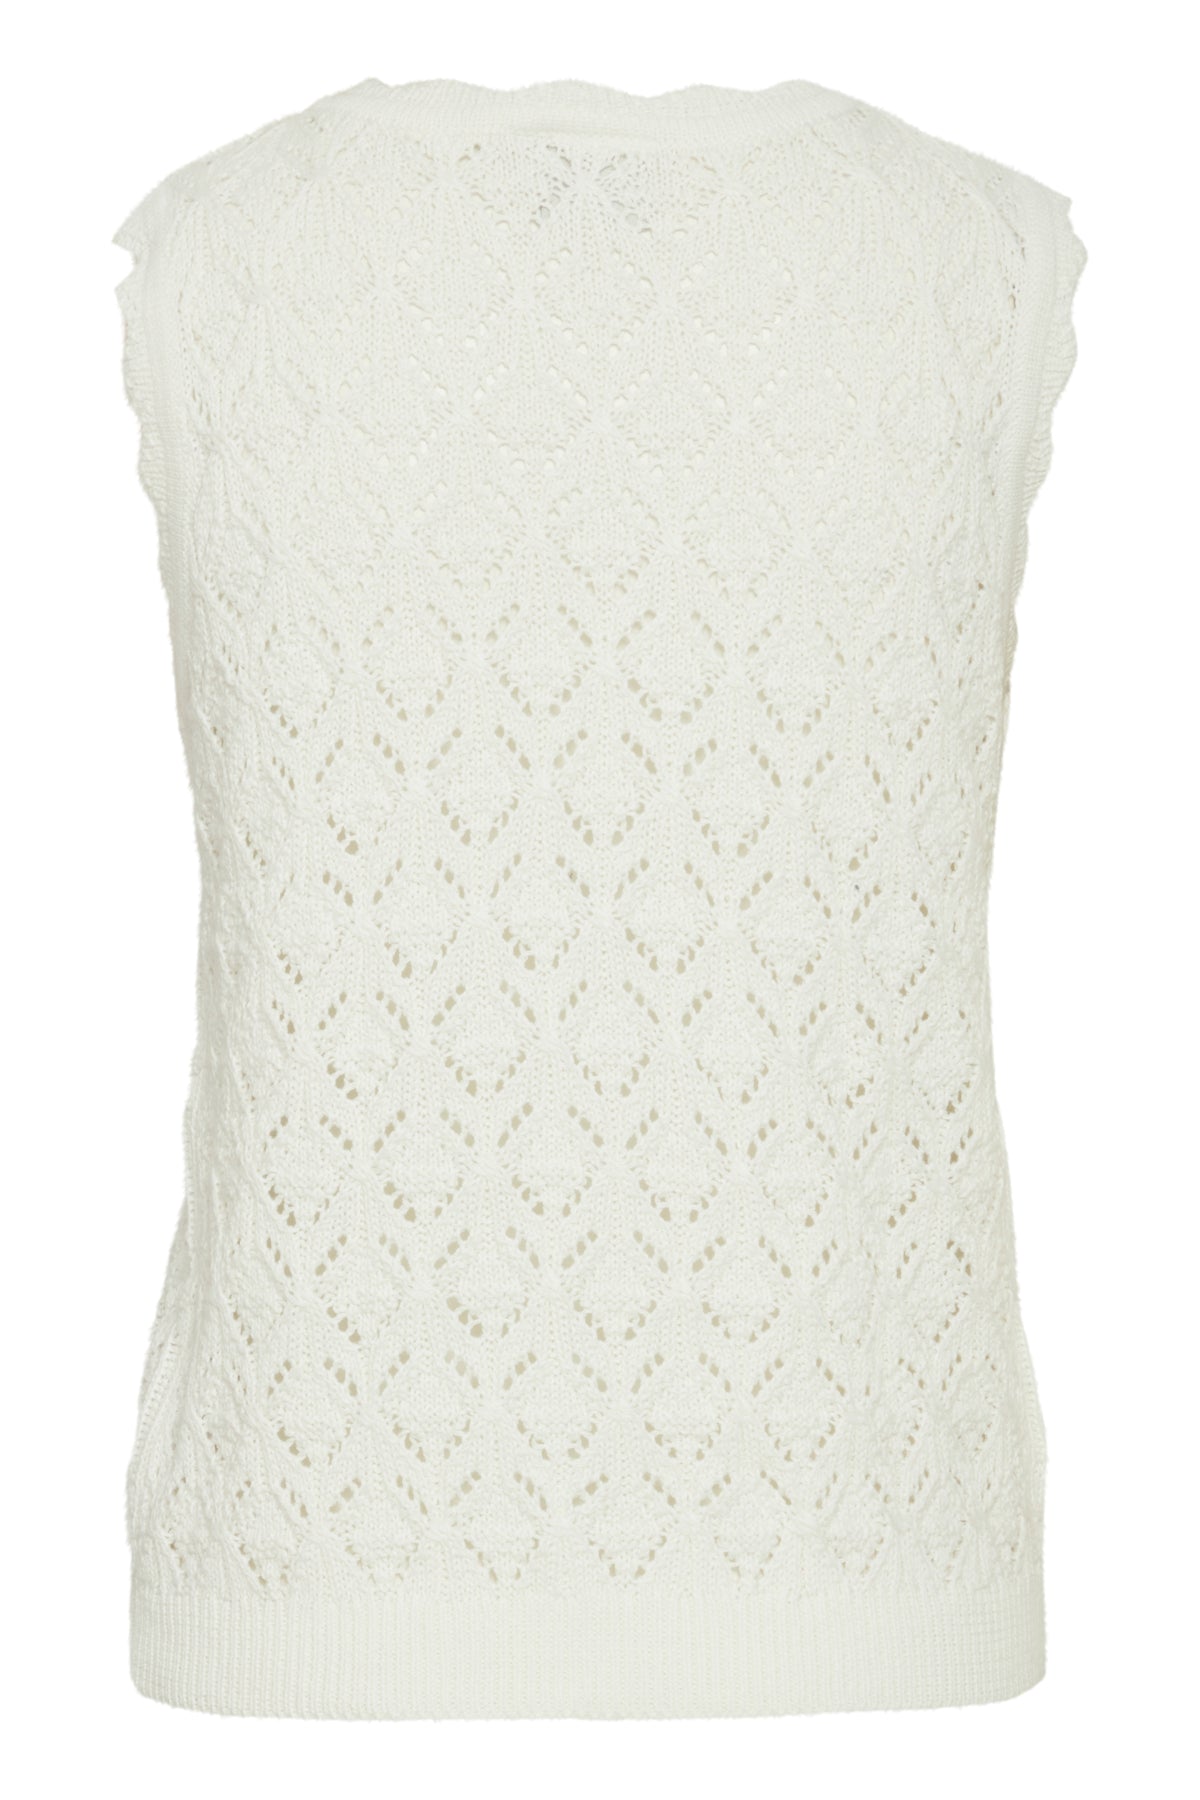 Blanca Knitted Pullover in Cloud Dancer